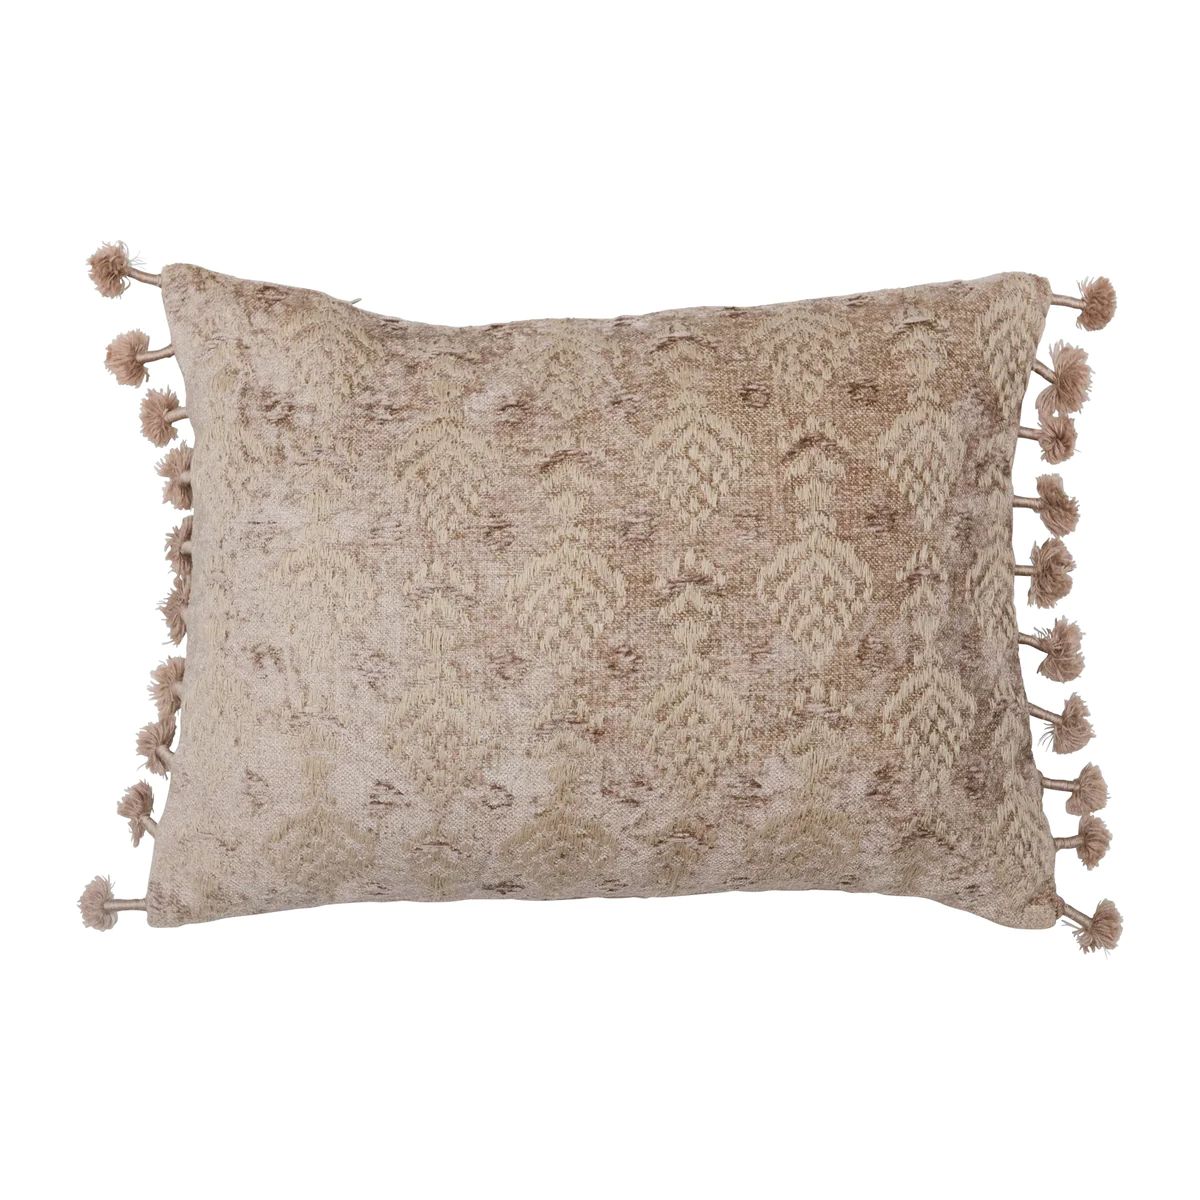 Woven Chenille Lumbar Pillow with Tassels and Embroidery | APIARY by The Busy Bee